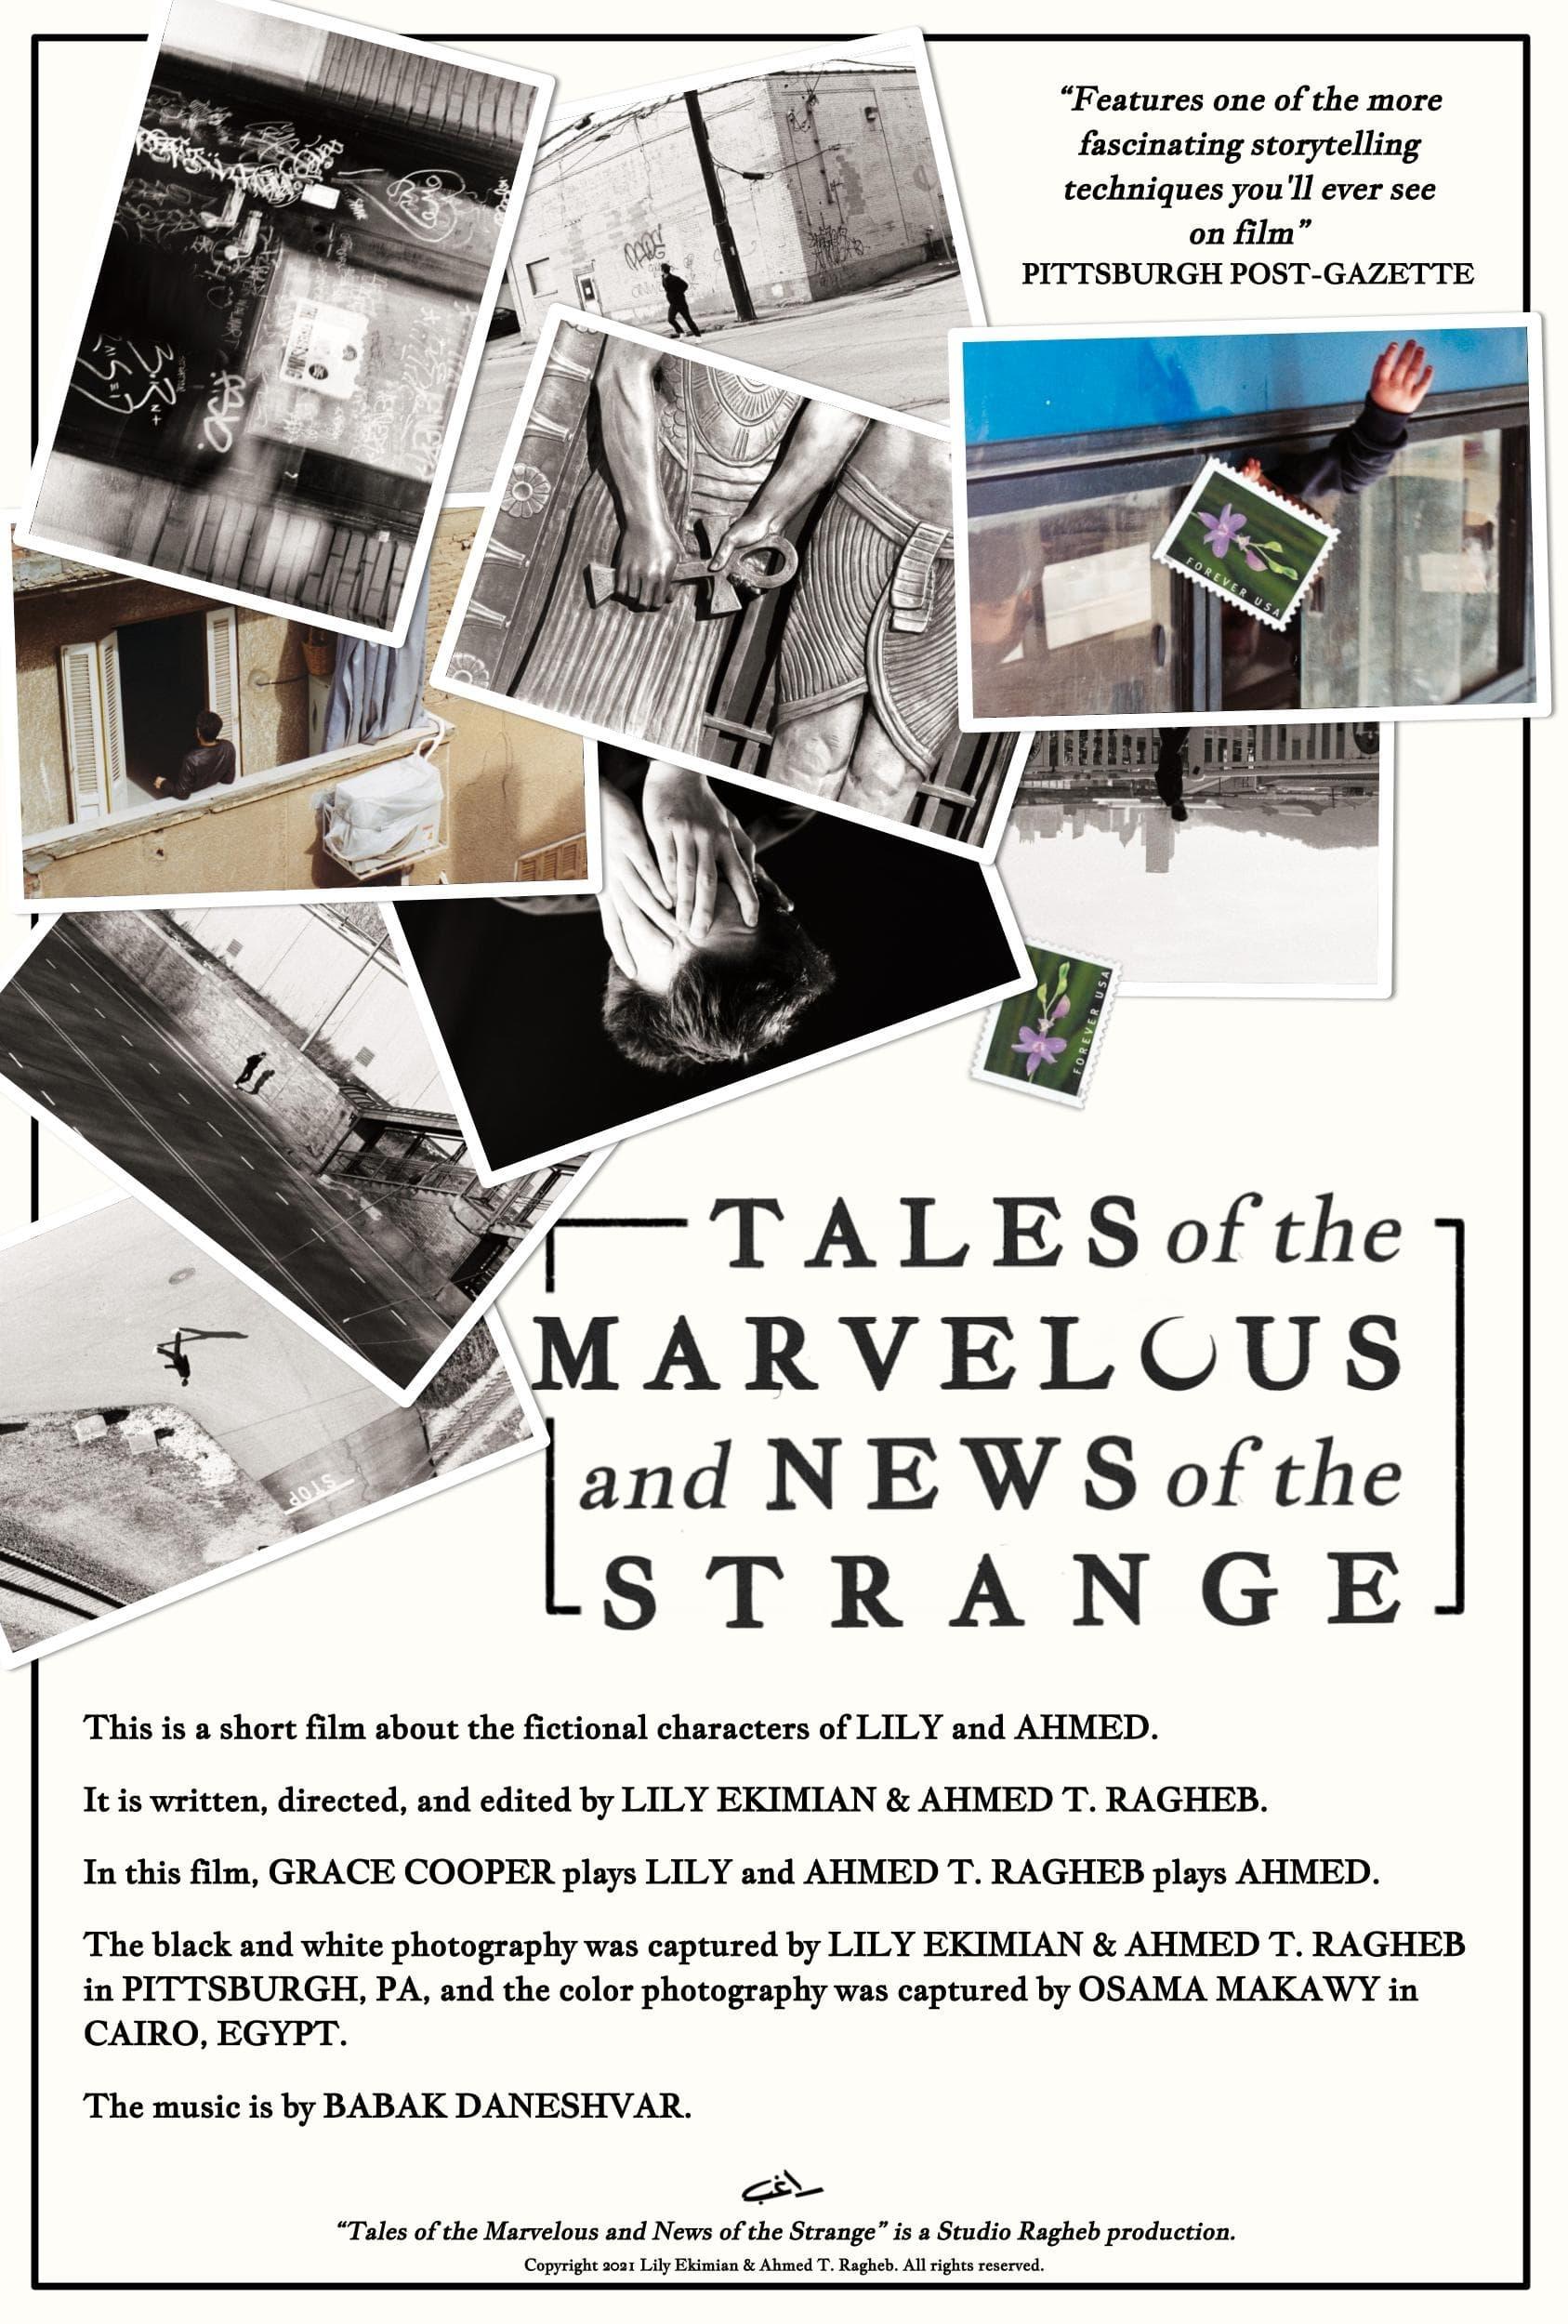 Tales of the Marvelous and News of the Strange poster